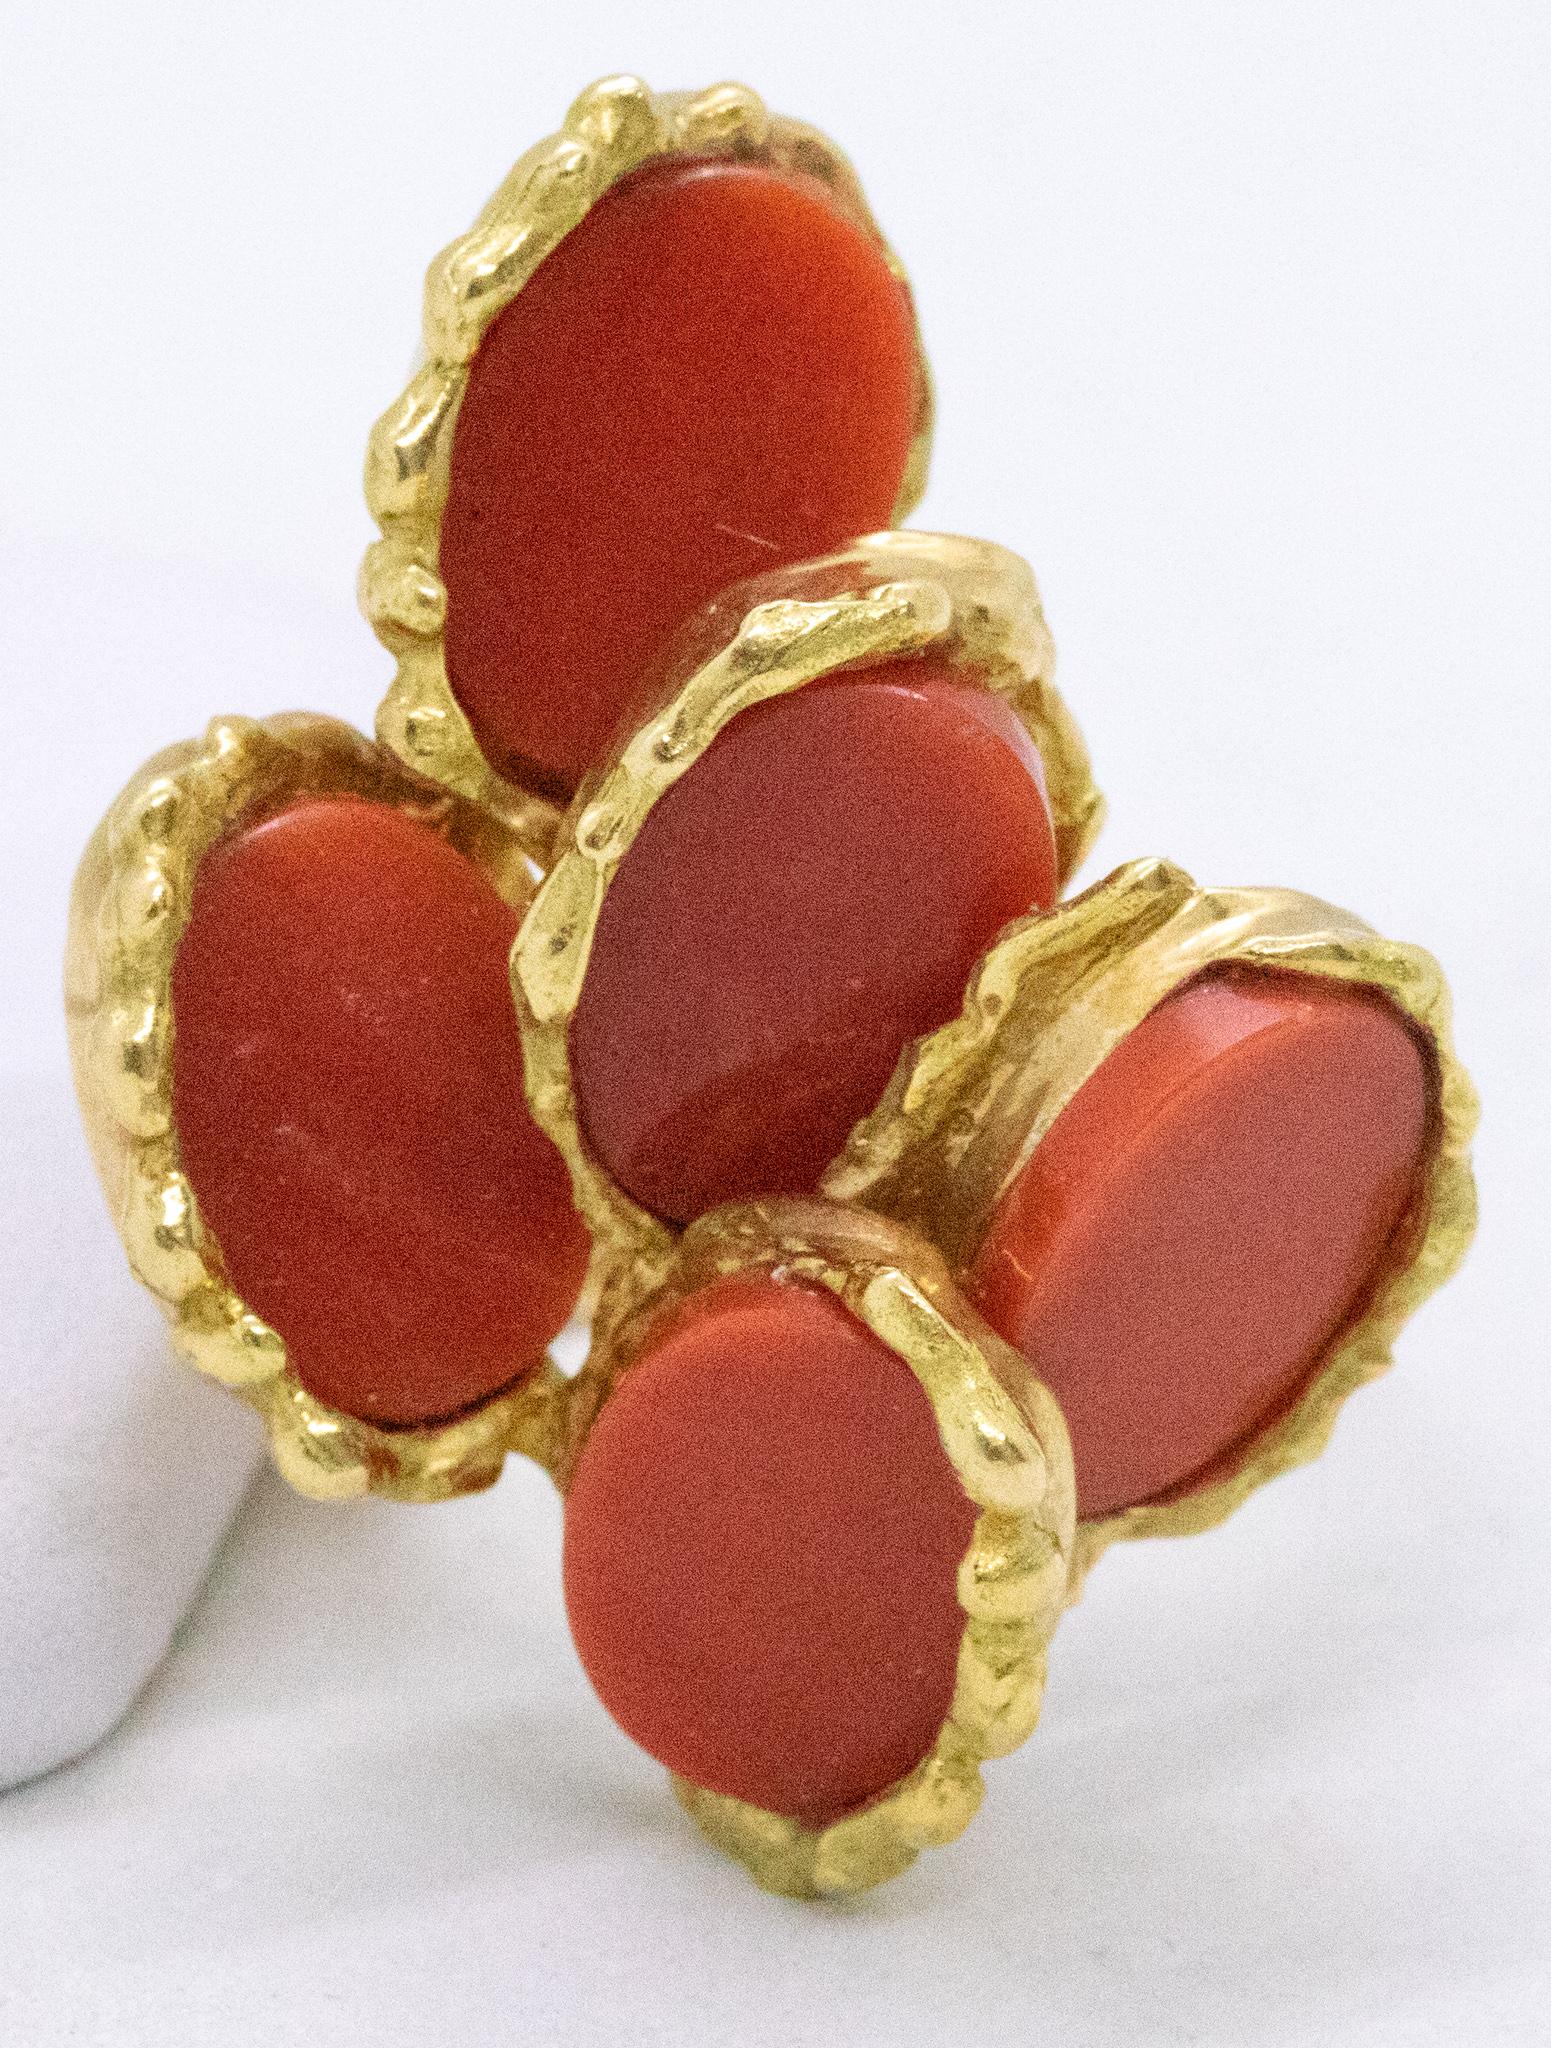 Cabochon Chaumet 1970 Paris Retro Cocktail Ring in 18Kt Gold with Red Coral Carvings For Sale